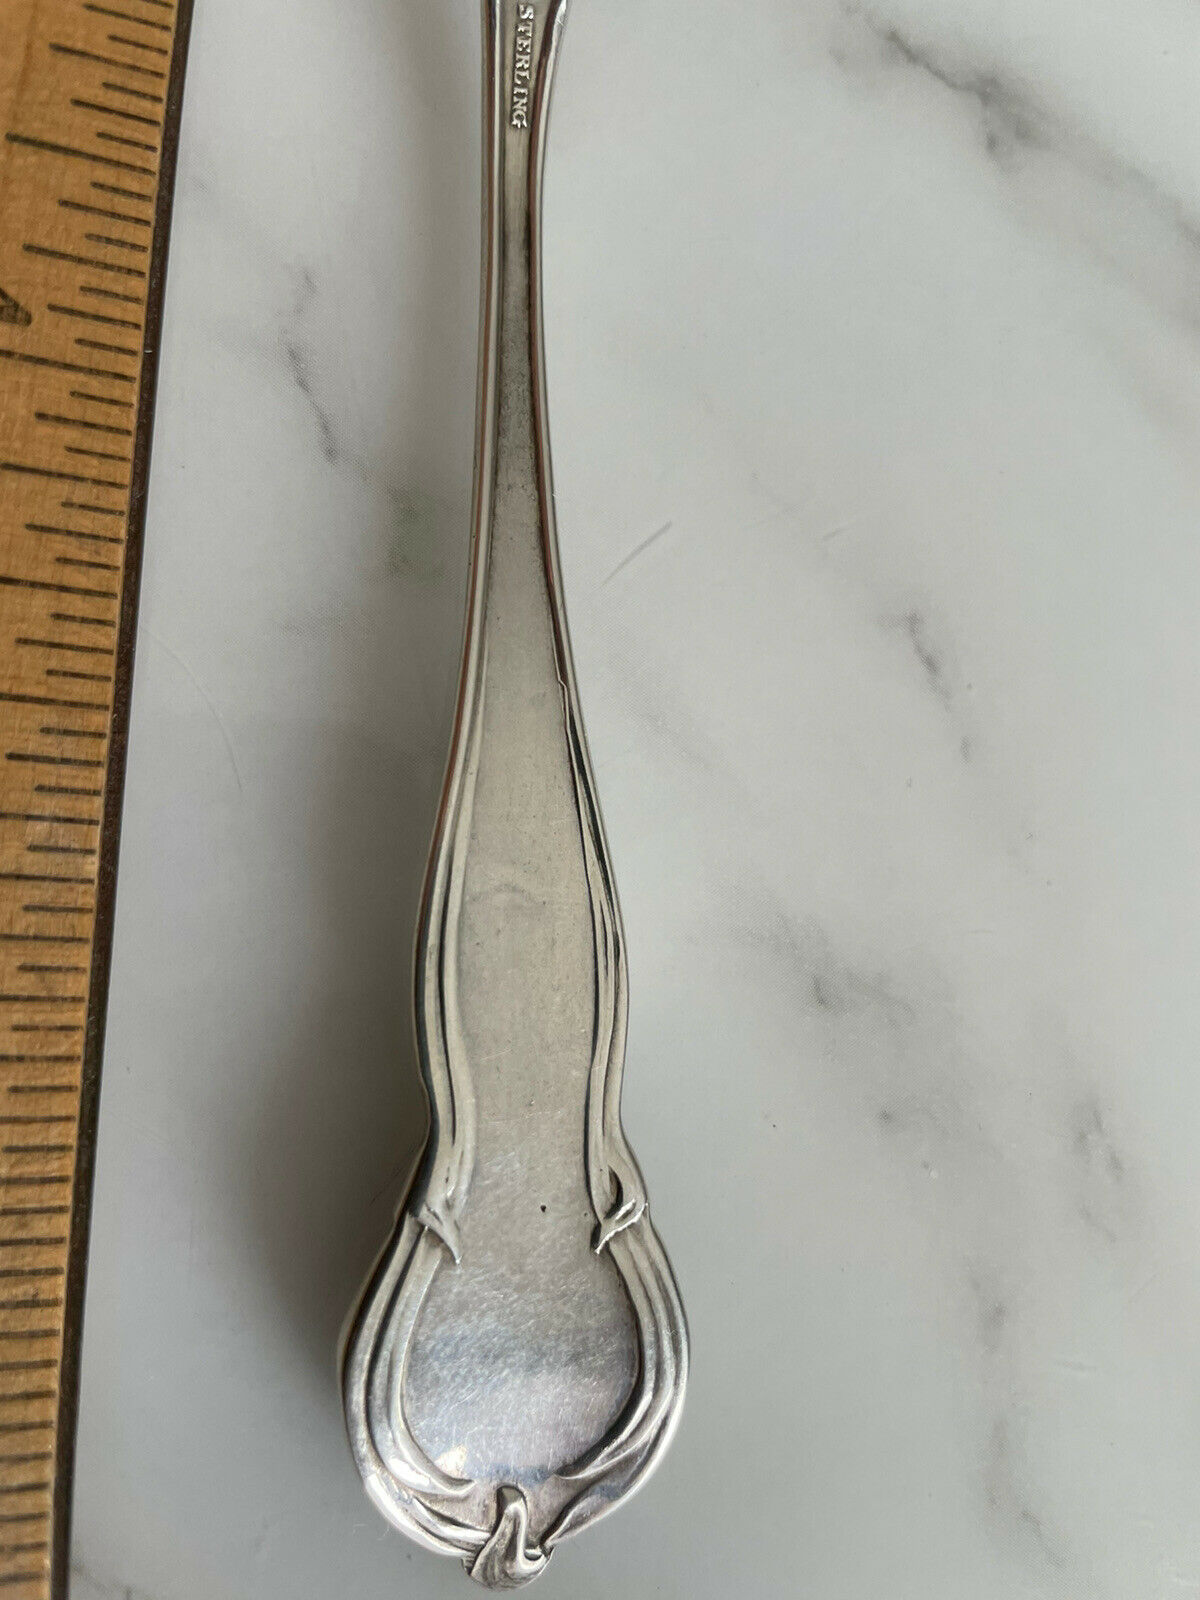 Watson Mechanics Sterling Silver Floral  Orchid Teaspoon 6" 35.2g Champaign Ill